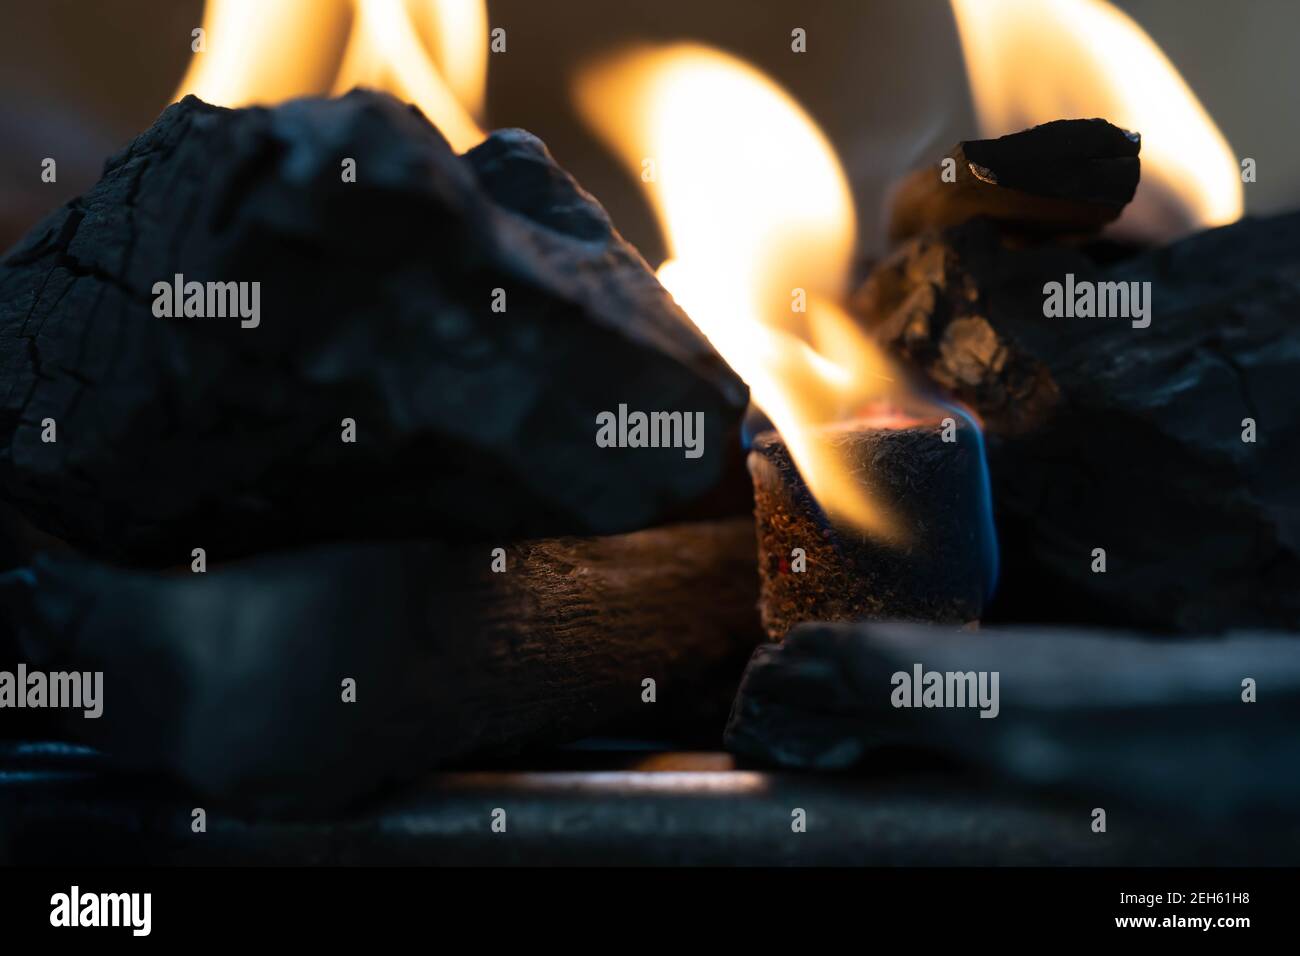 Glowing barbecue charcoal briquettes in a BBQ coal lighter. Fire flame is started using fire starters placed among charcoal in the barbeque charcoal g Stock Photo